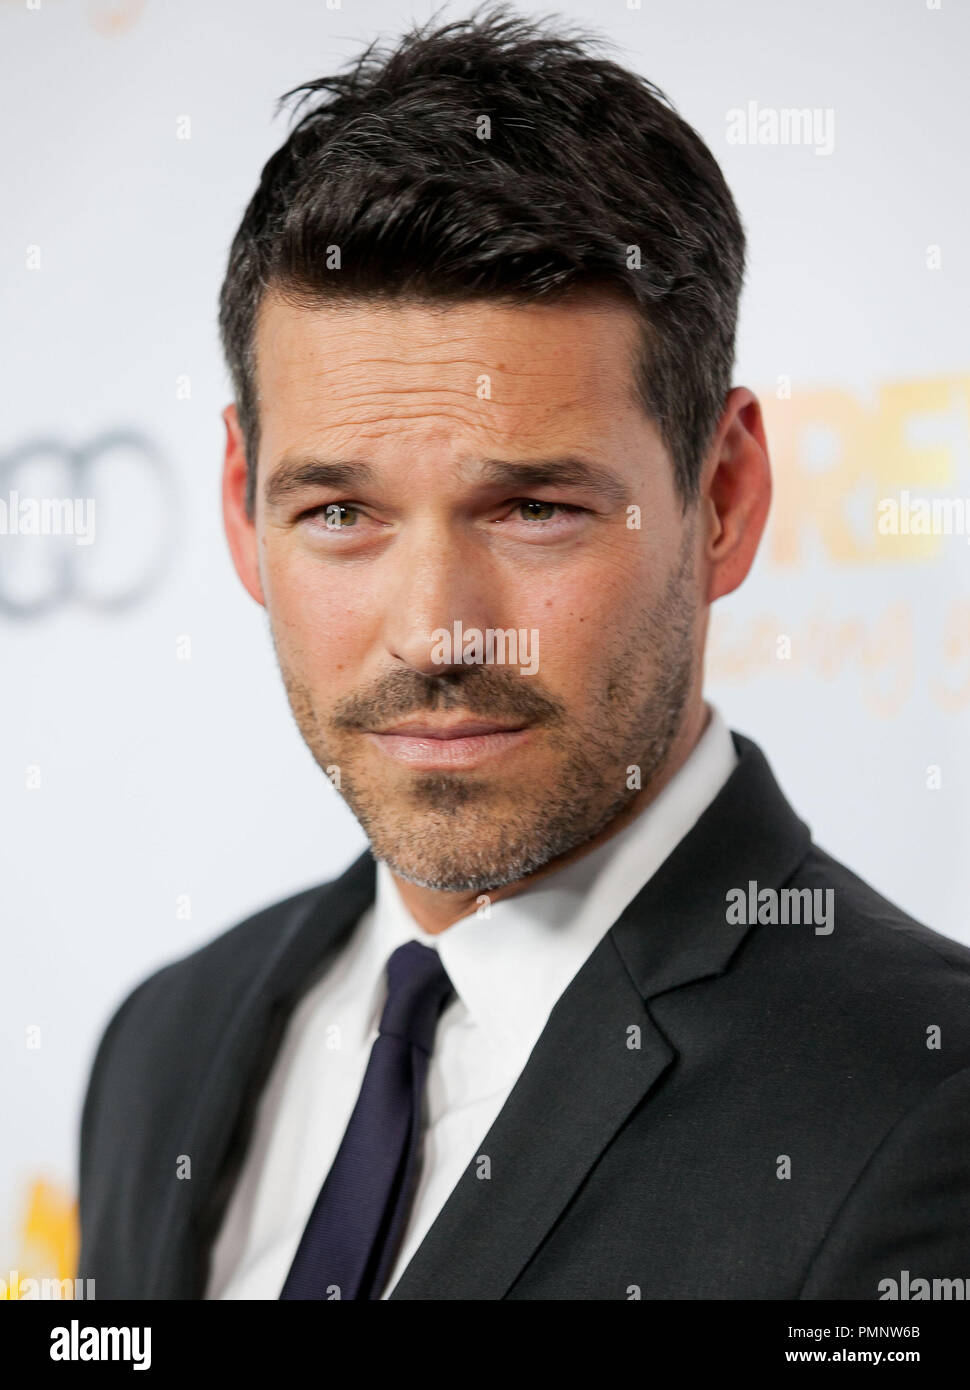 Eddie Cibrian at The Trevor Project's 2011 Trevor Live! held at The Hollywood Palladium in Hollywood, CA. The event took place on Sunday, December 4, 2011. Photo by Eden Ari/ PRPP/ PictureLux Stock Photo